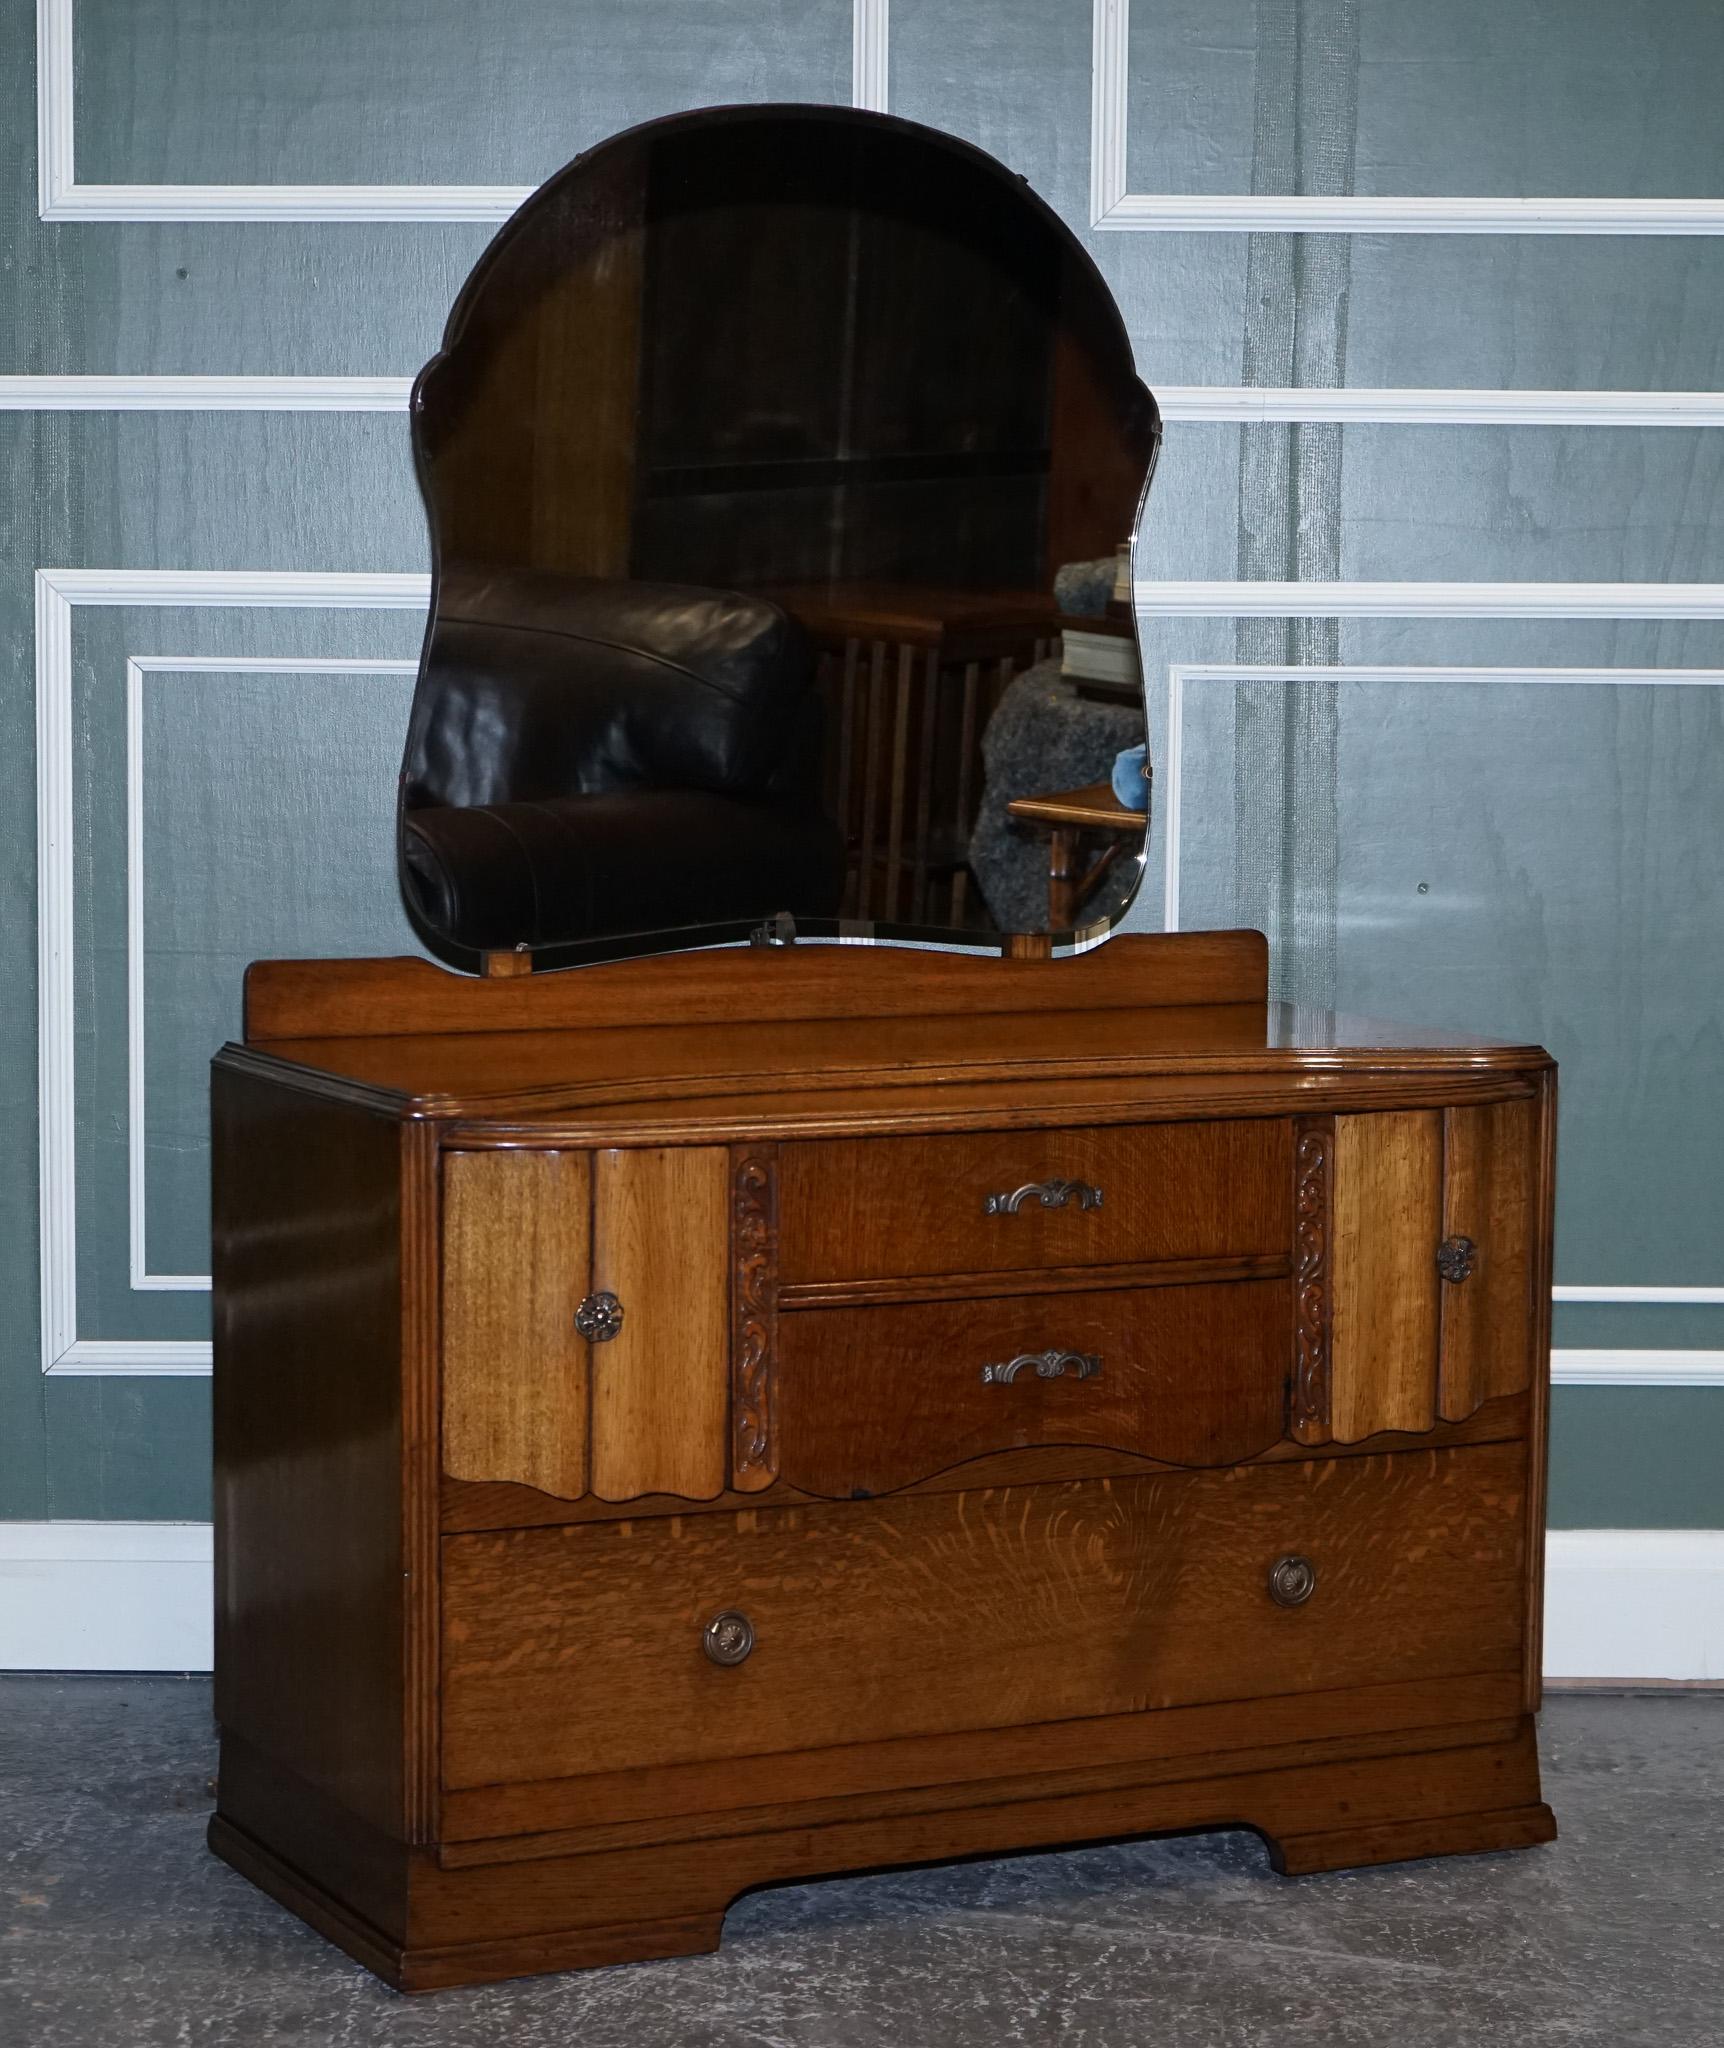 We are excited to present this lovely Vintage Oak Dressing Table.

Good looking dressing table, made from oak.
It has 4 drawers which give you plenty of space for storage. On the second middle drawer, there are two bits which show some damage to the